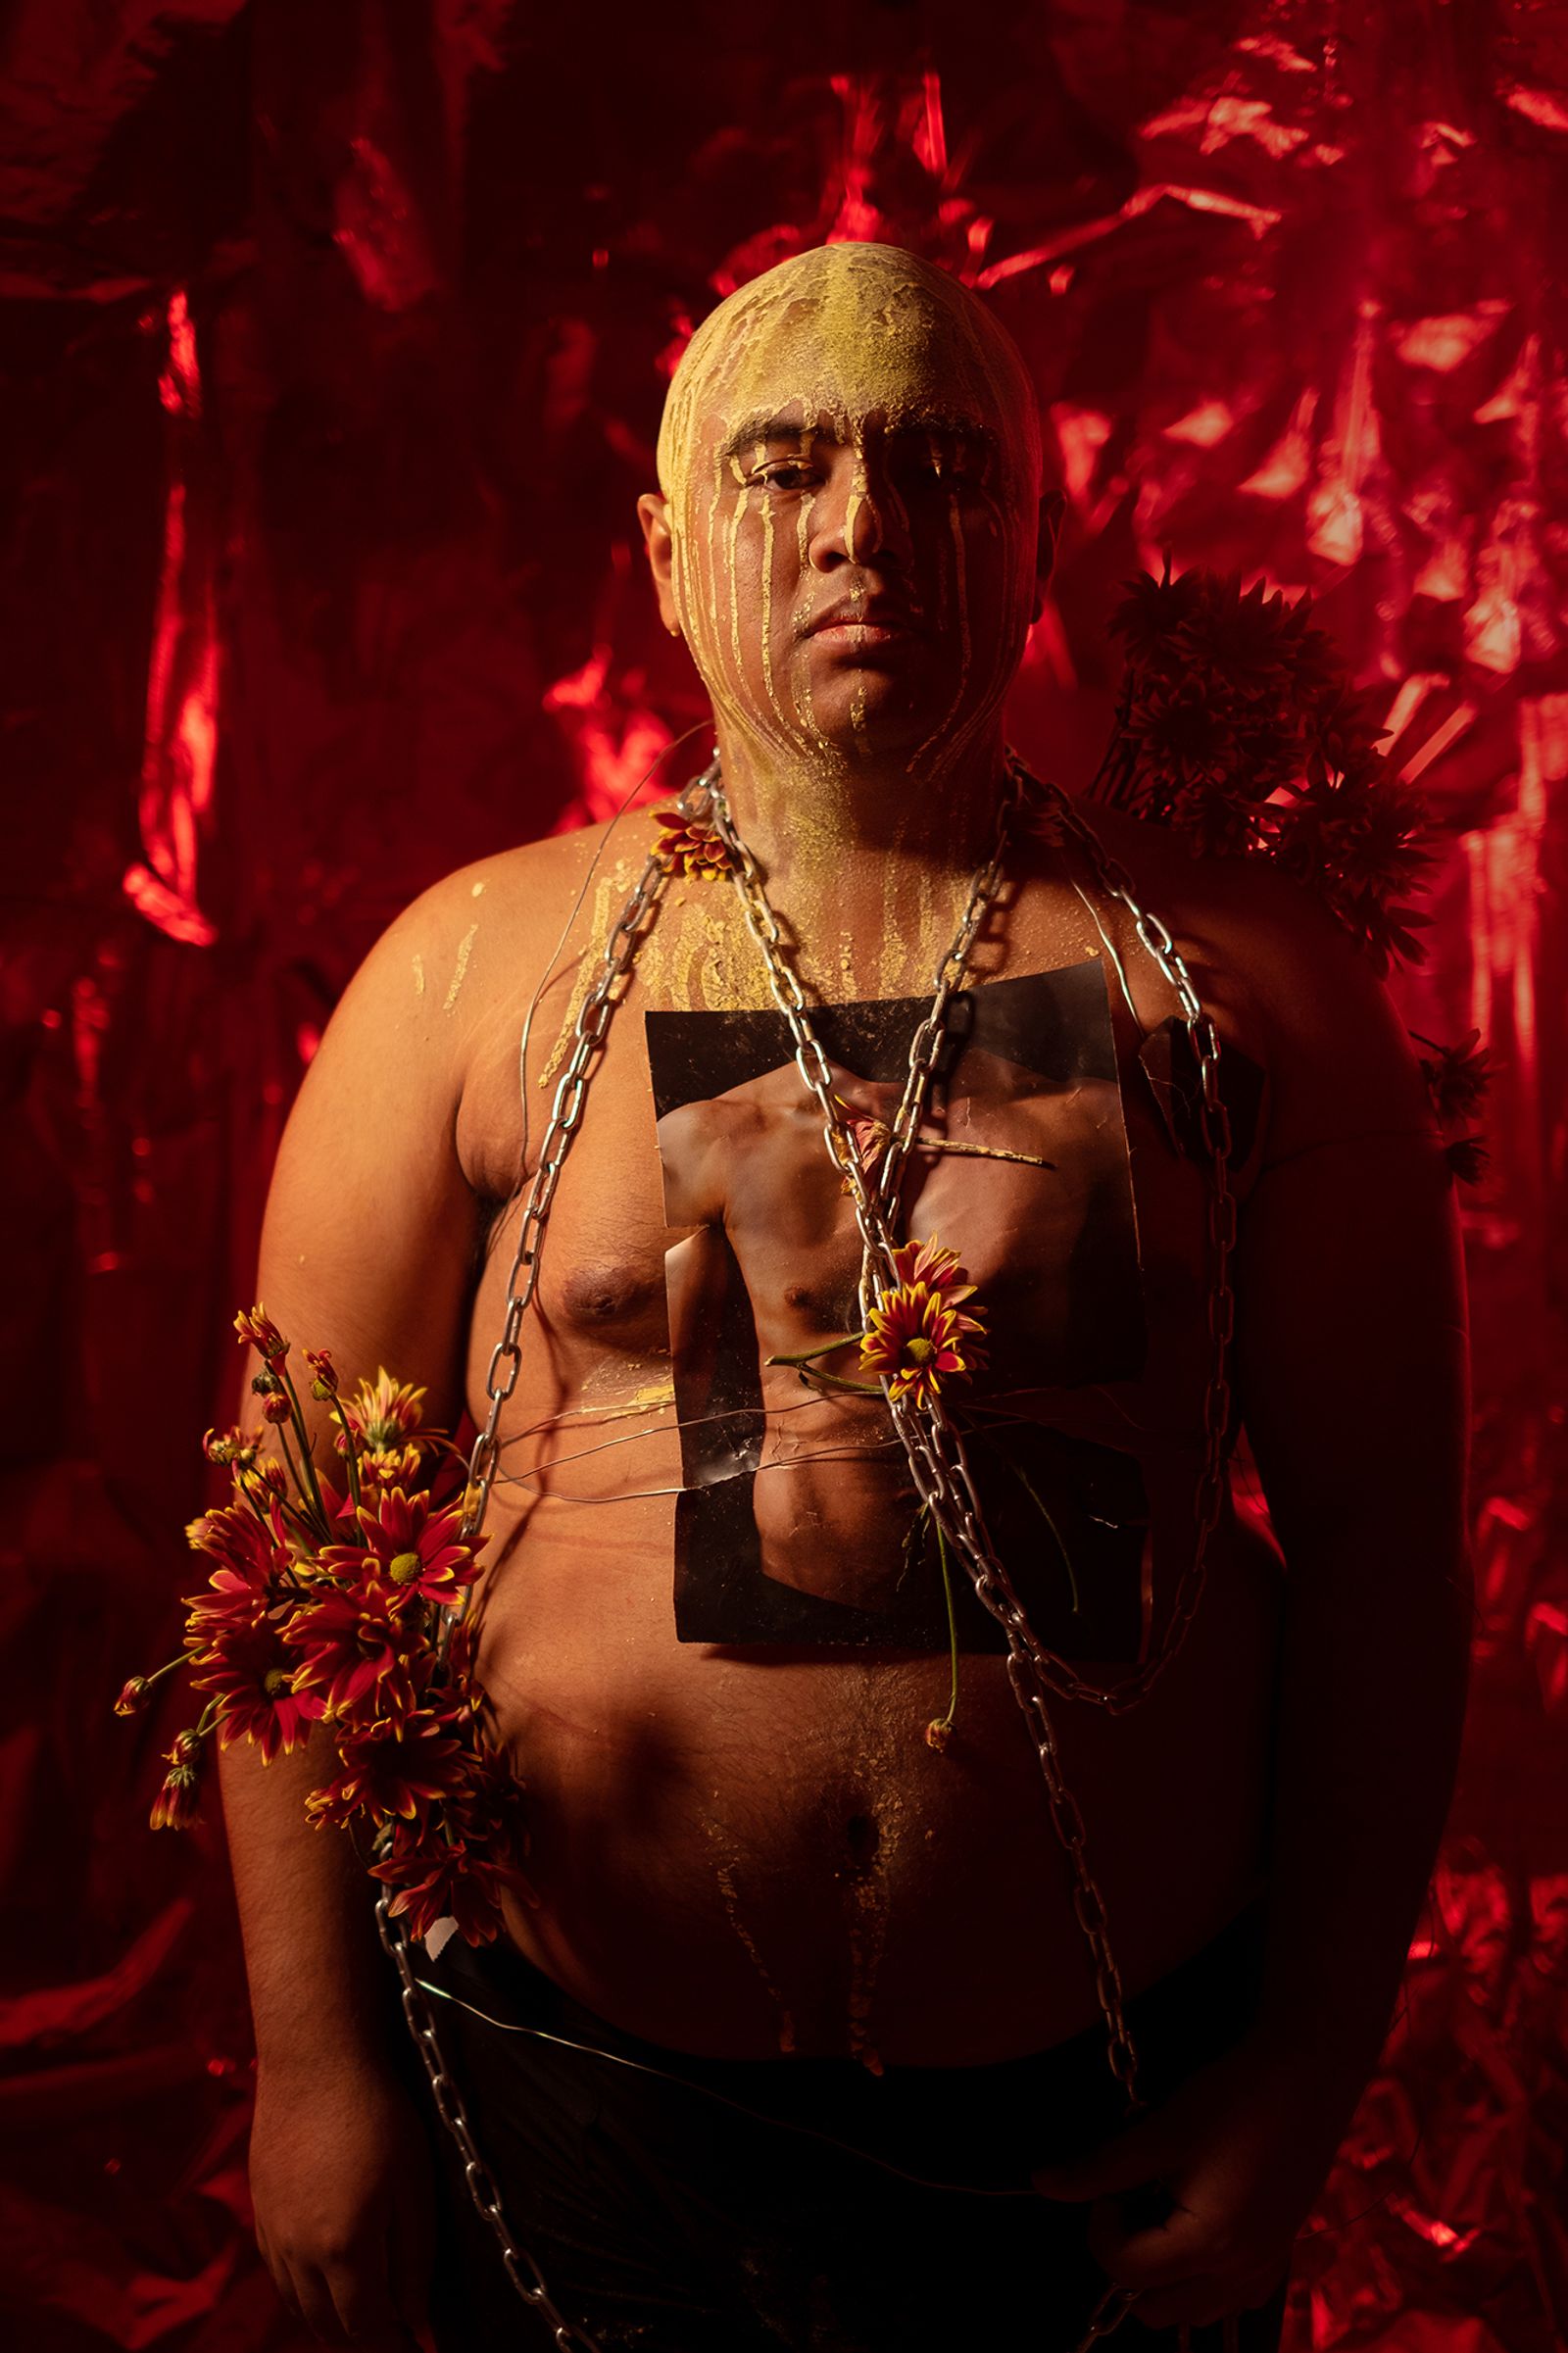 © Arjuna Asa - Image from the How Does It Feel Like to Be A Fat Person? photography project